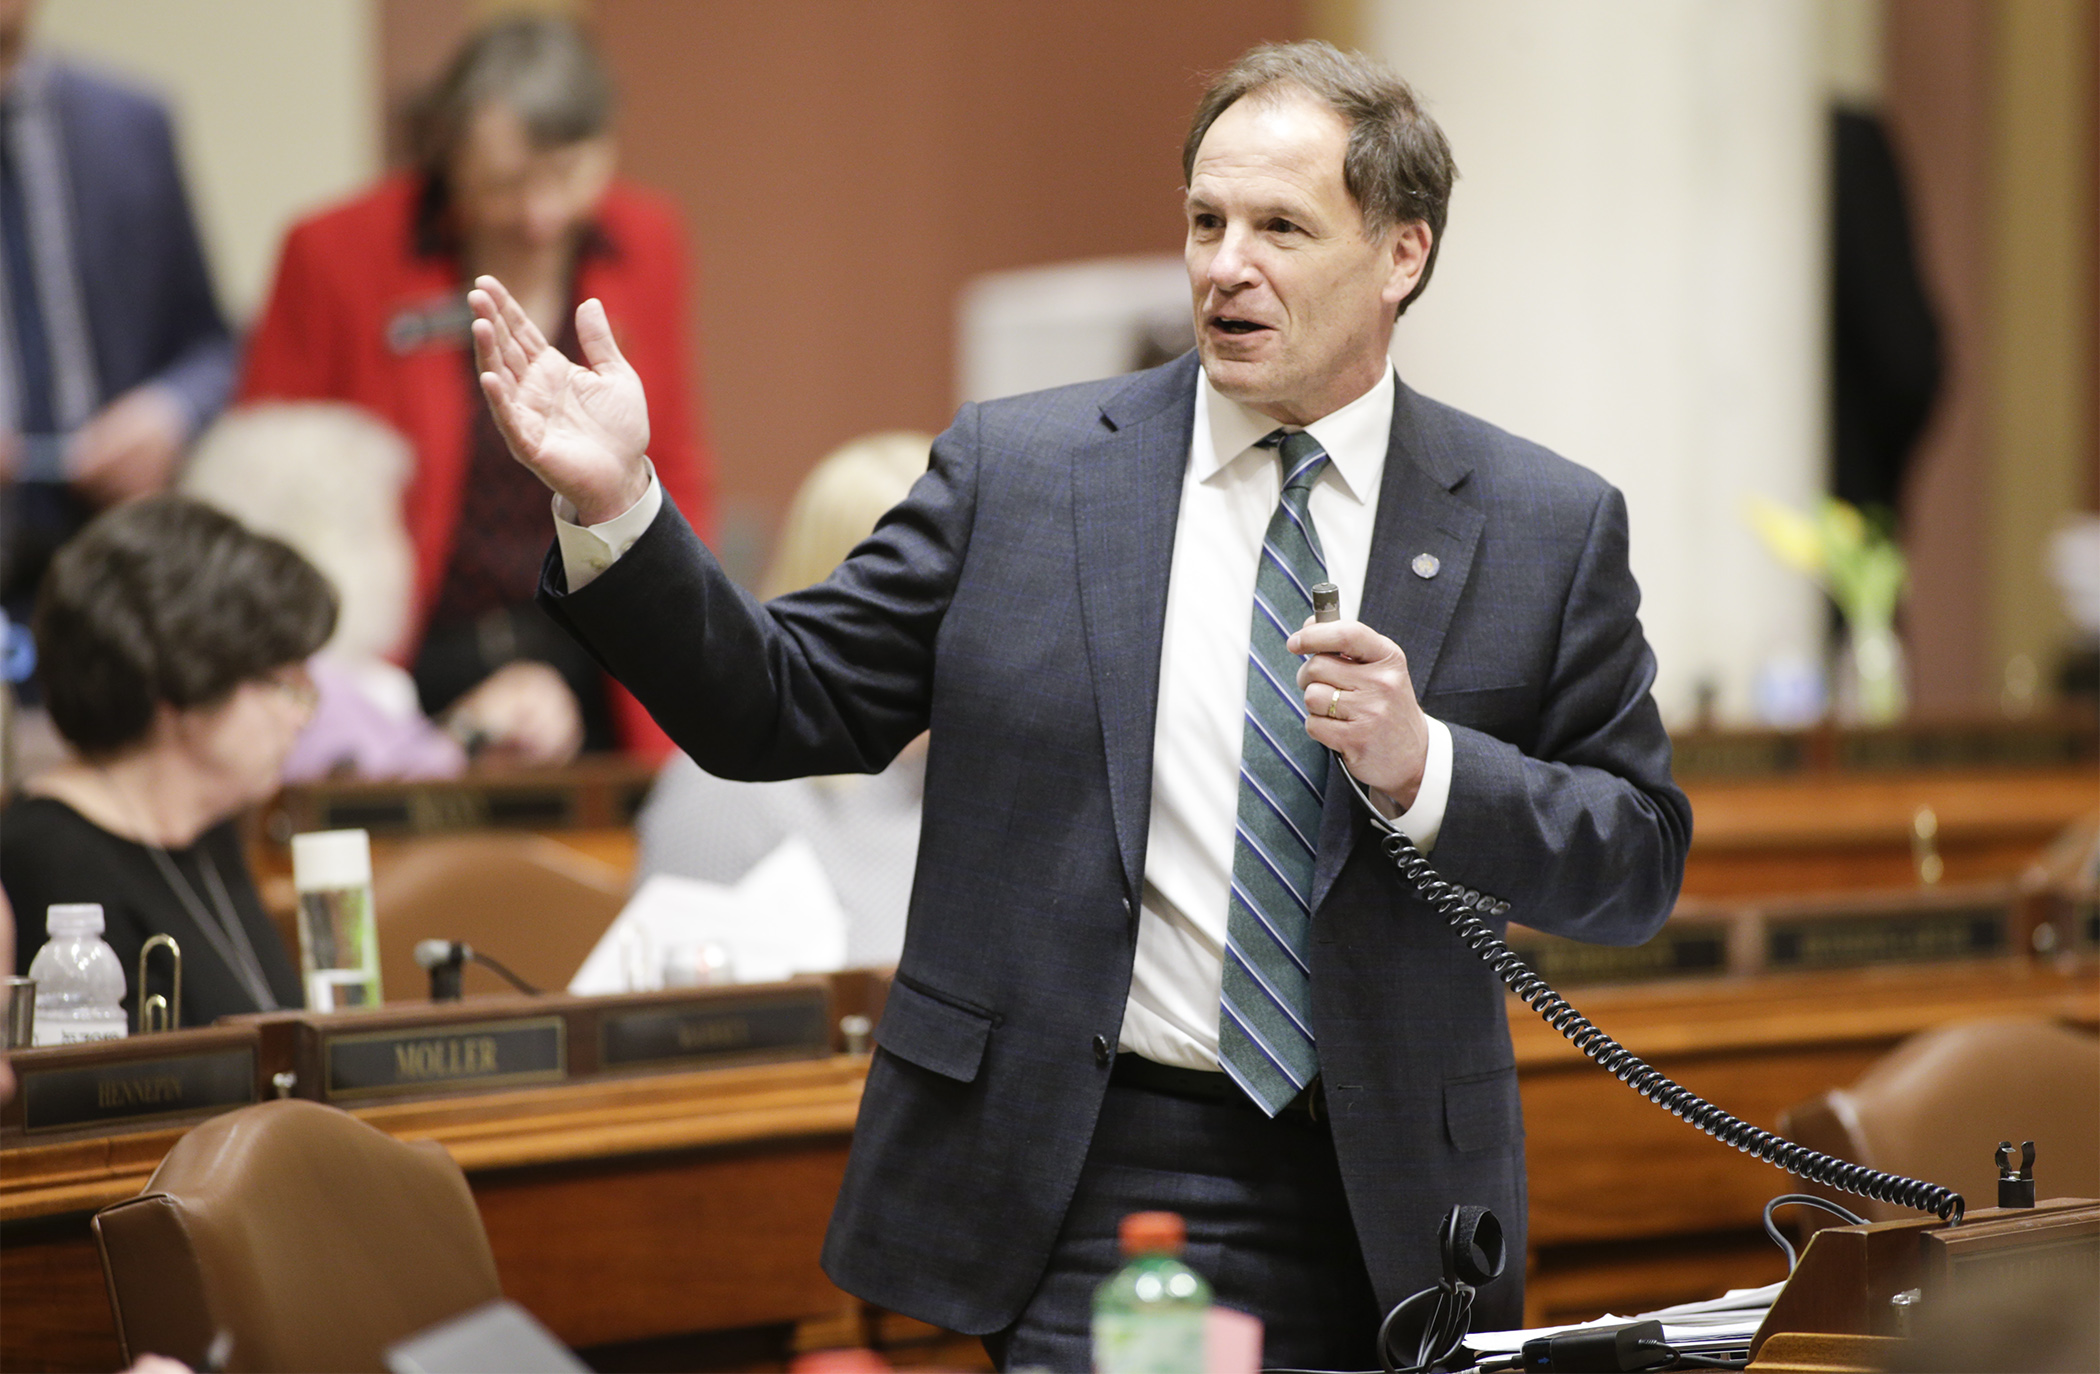 Rep. Paul Marquart, chair of the House Taxes Committee, makes his opening comments during floor debate of HF2125, the omnibus tax bill, April 25. Photo by Paul Battaglia